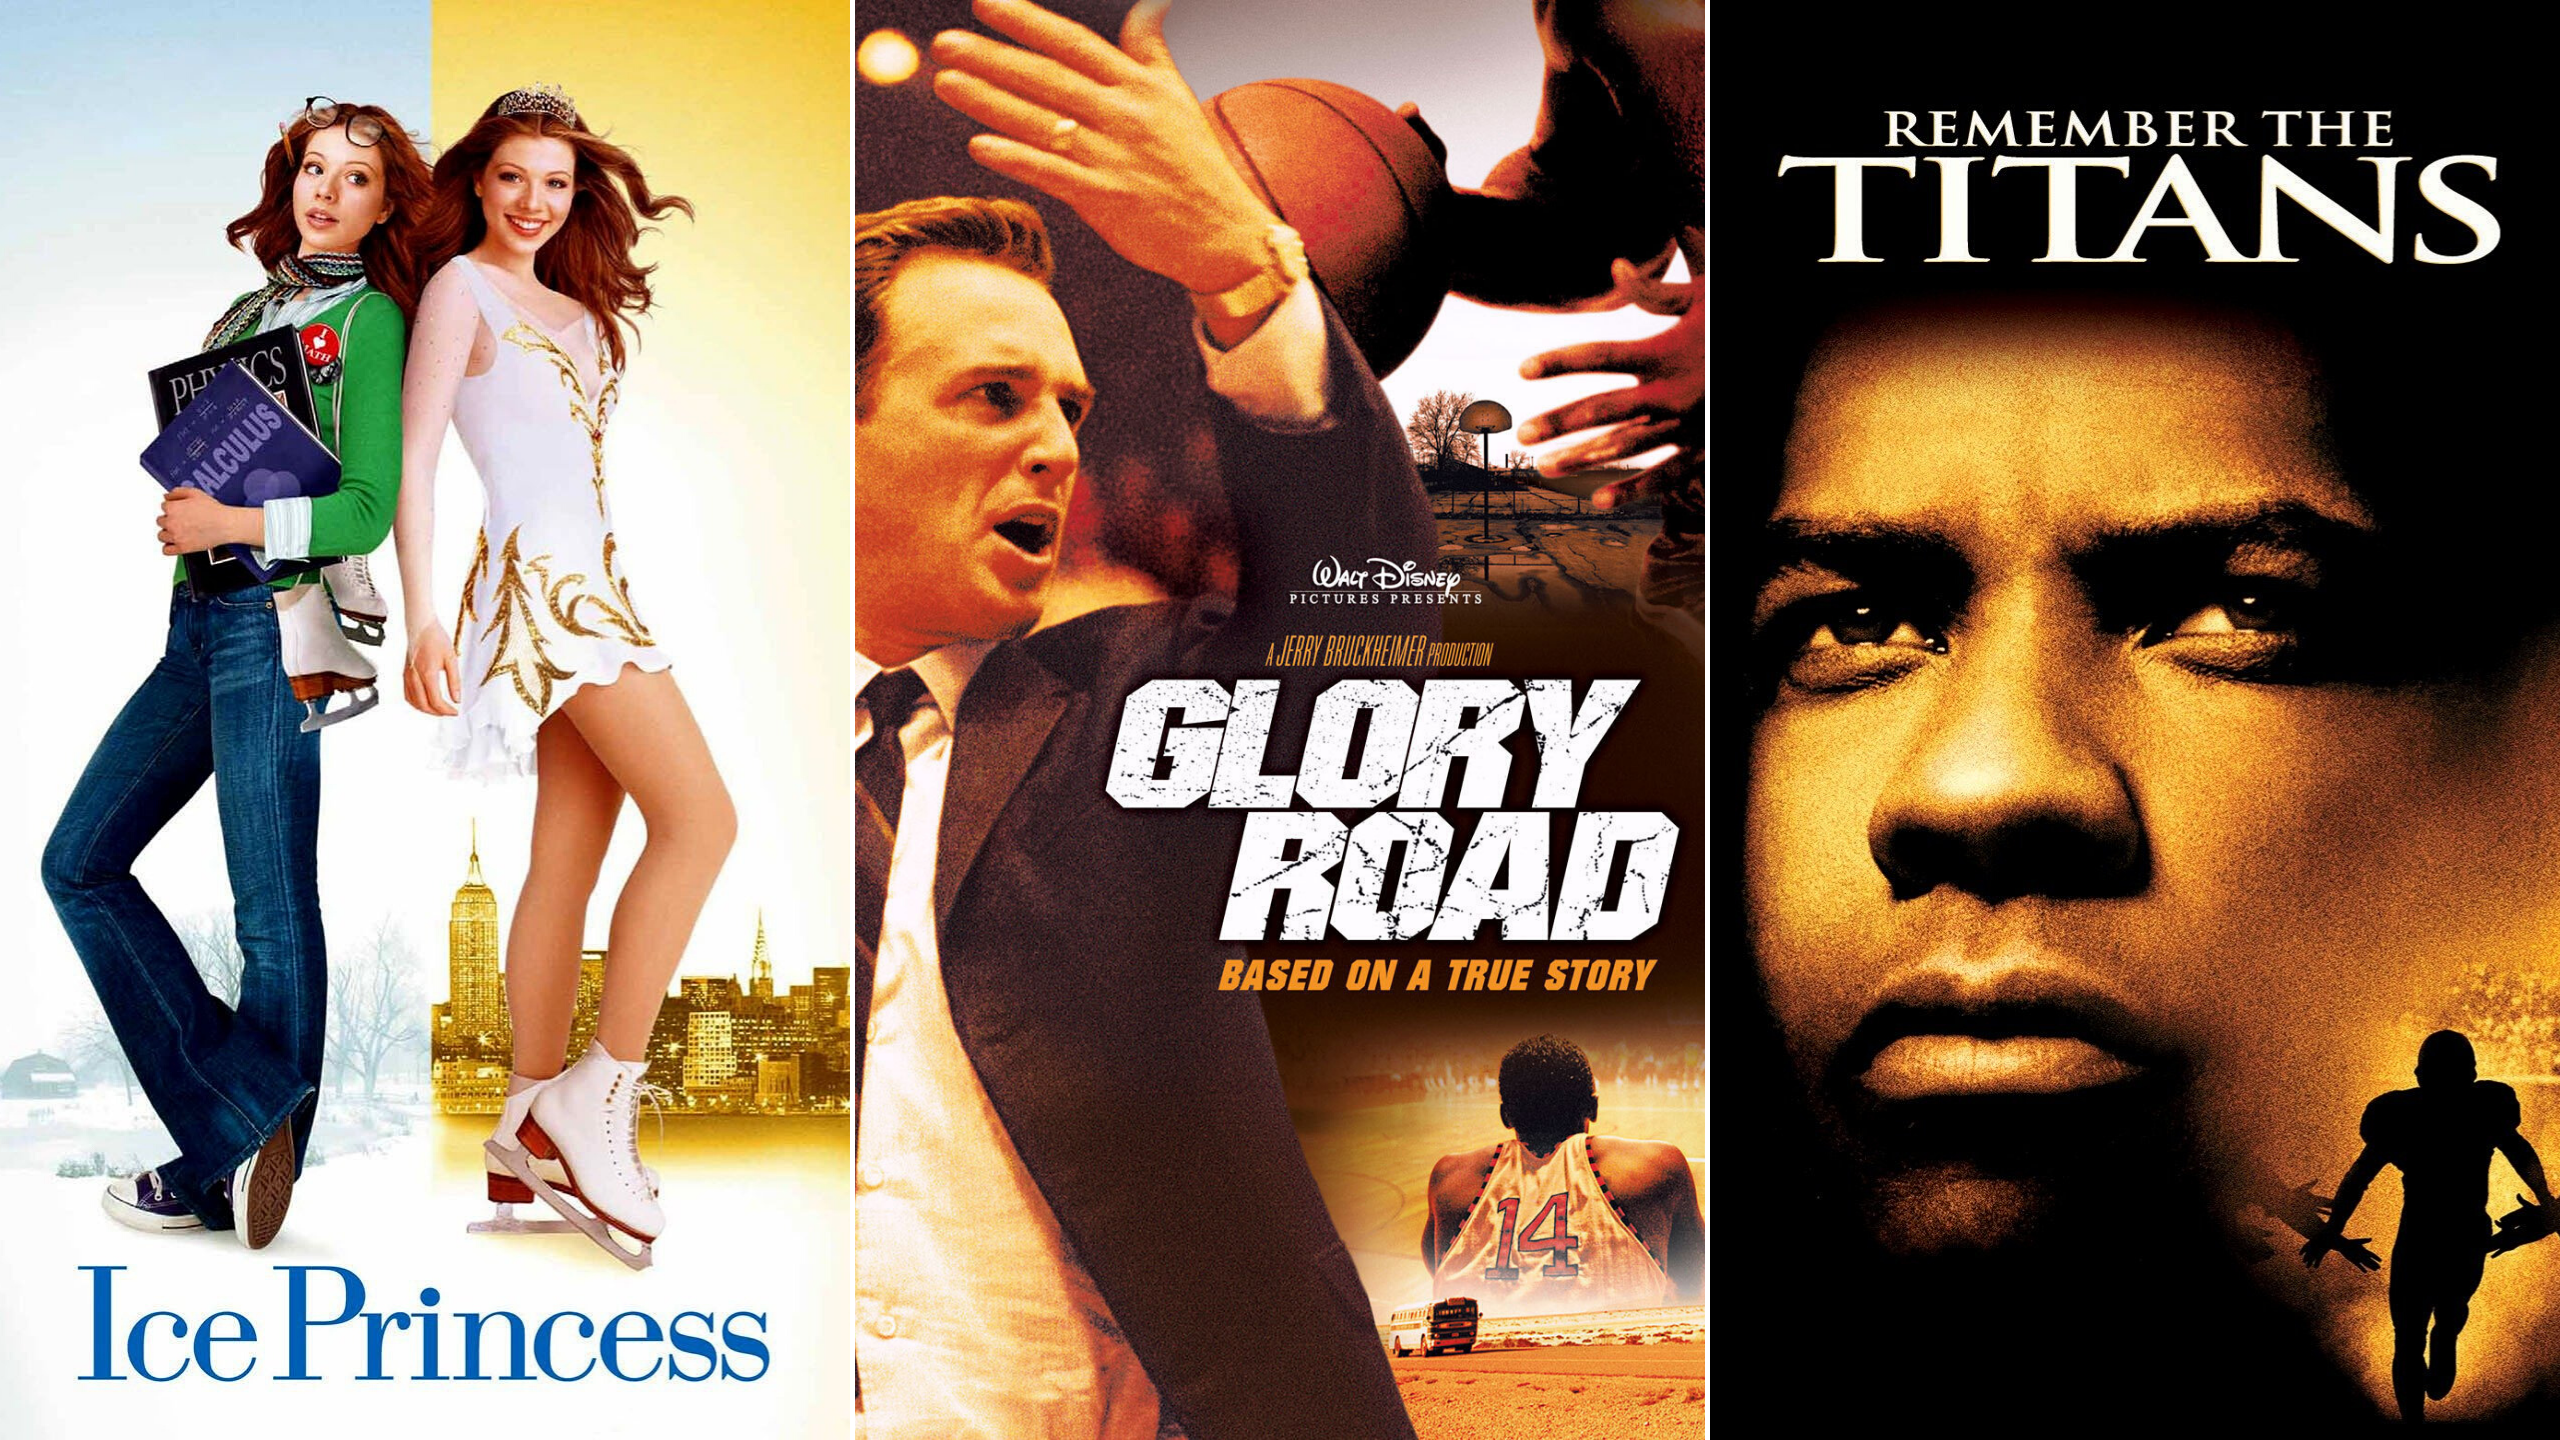 12 Feel Good Movies For Sports Lovers To Watch On Disney Plus